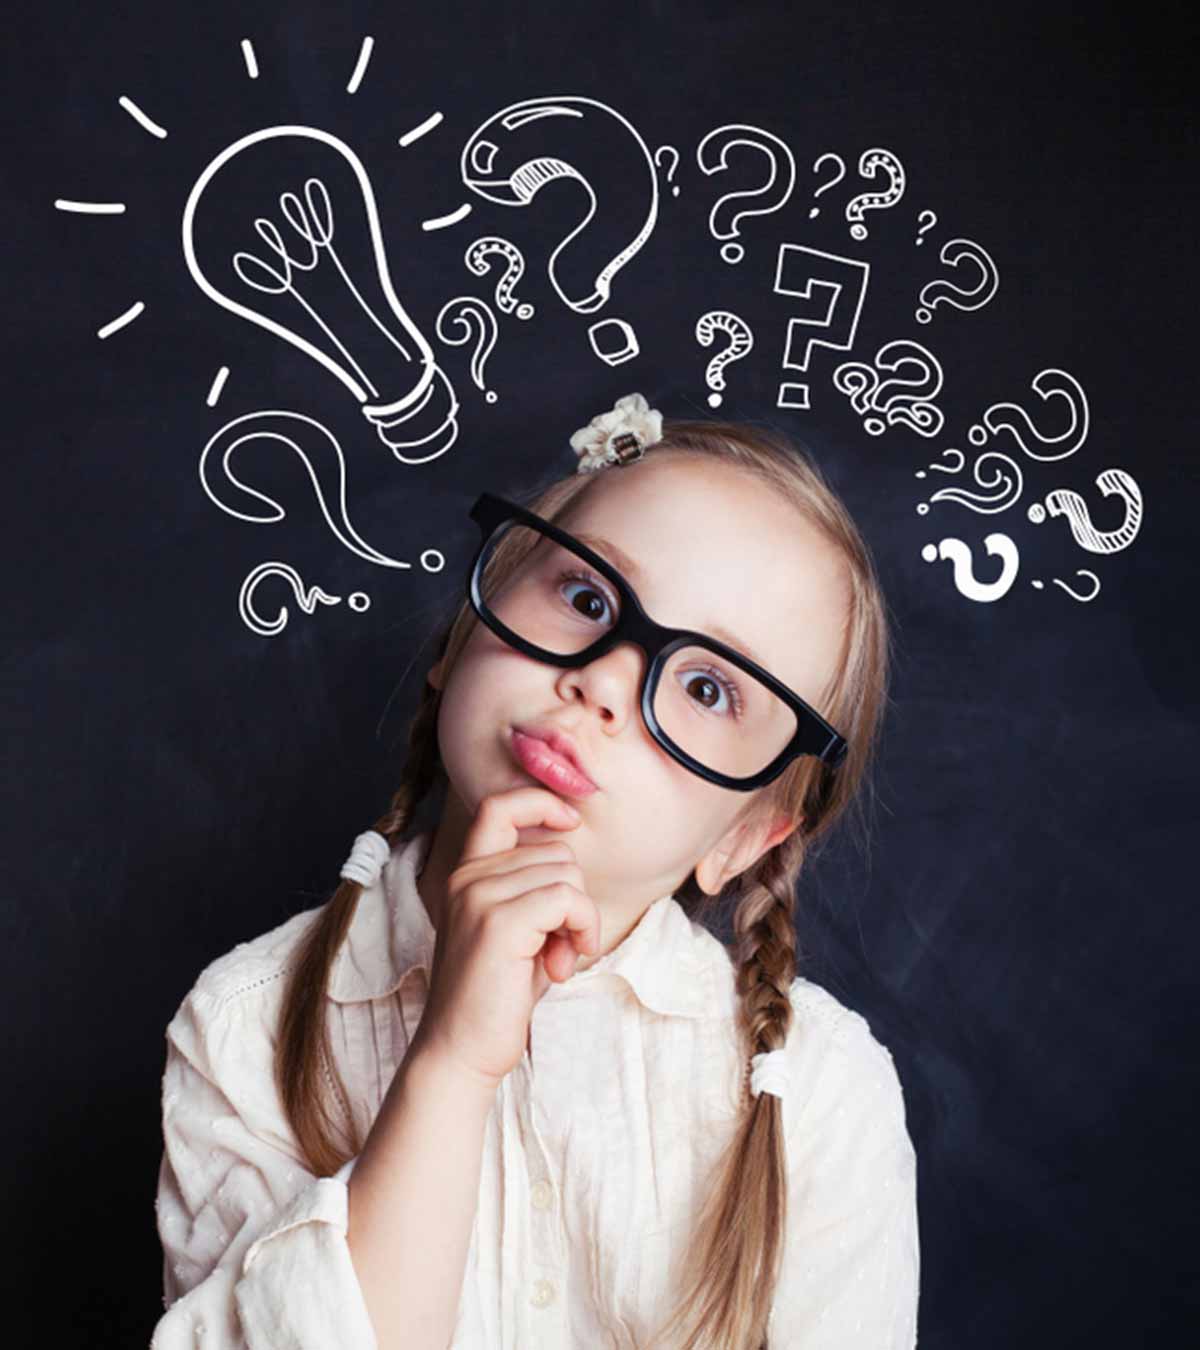 Does Your Child Ask Too Many Questions?